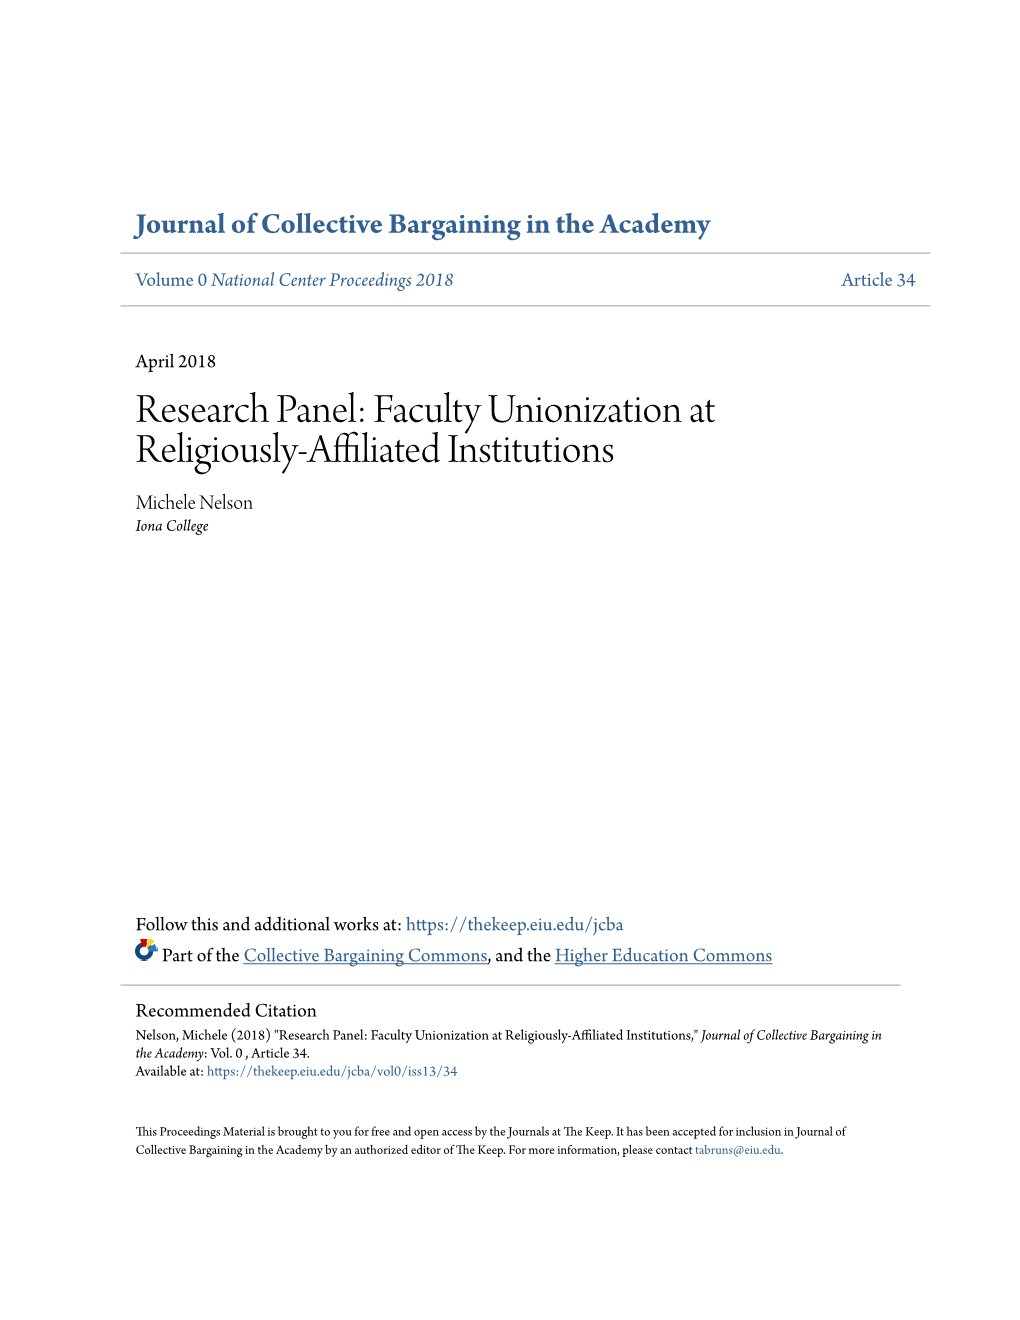 Research Panel: Faculty Unionization at Religiously-Affiliated Institutions Michele Nelson Iona College